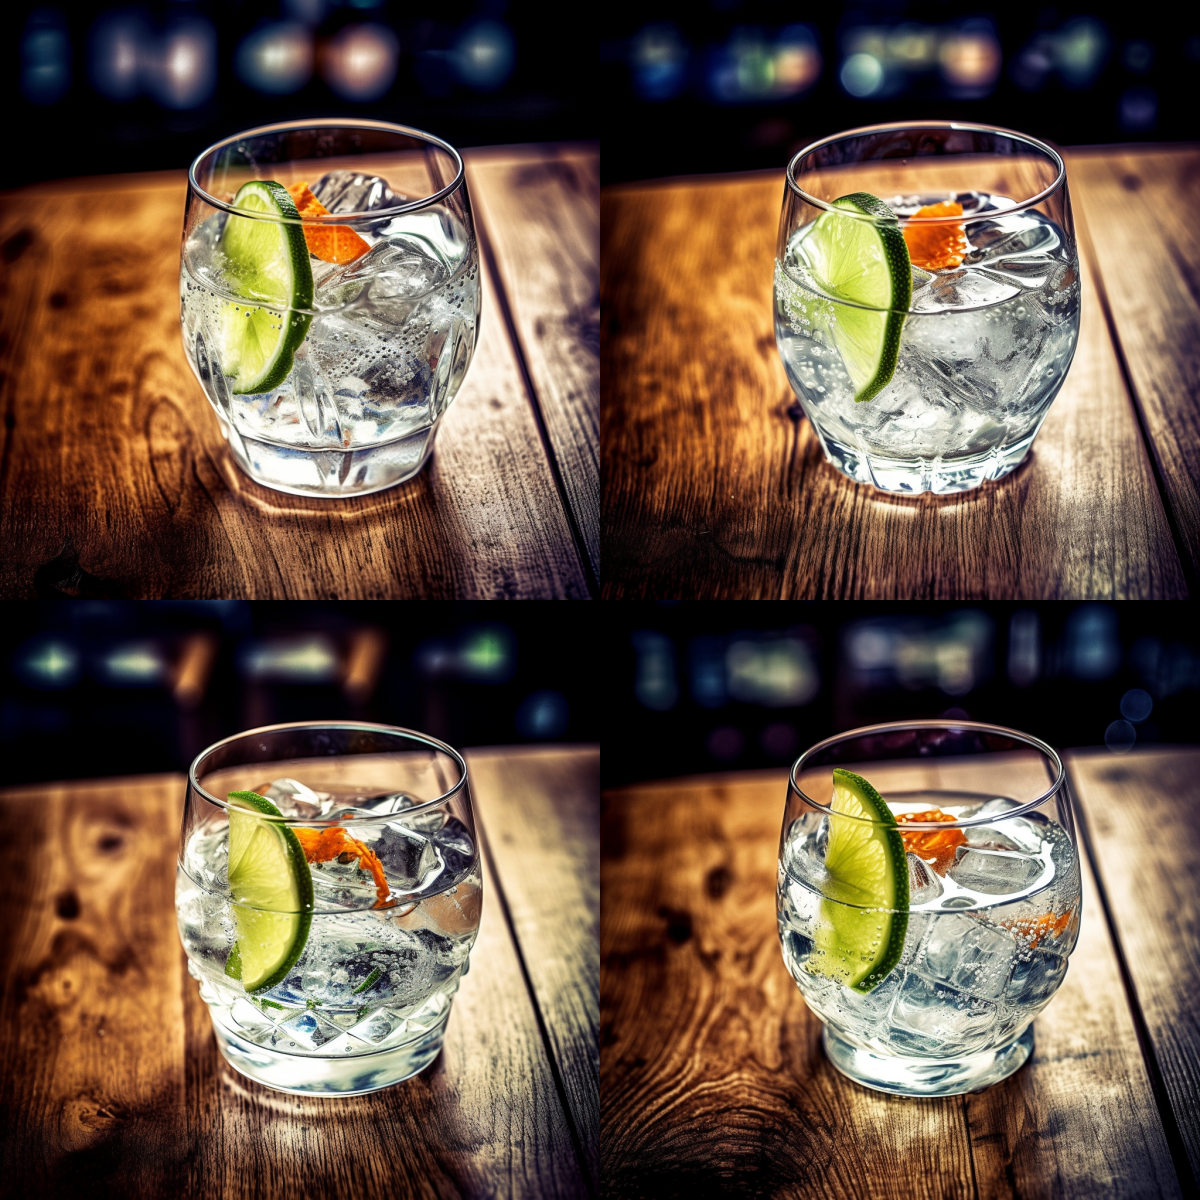 Senwater_gin_tonic_on_wooden_table_wood_wall_background_refresh_ffa9b928-27ef-4a0a-be97-81389d5ad5c2